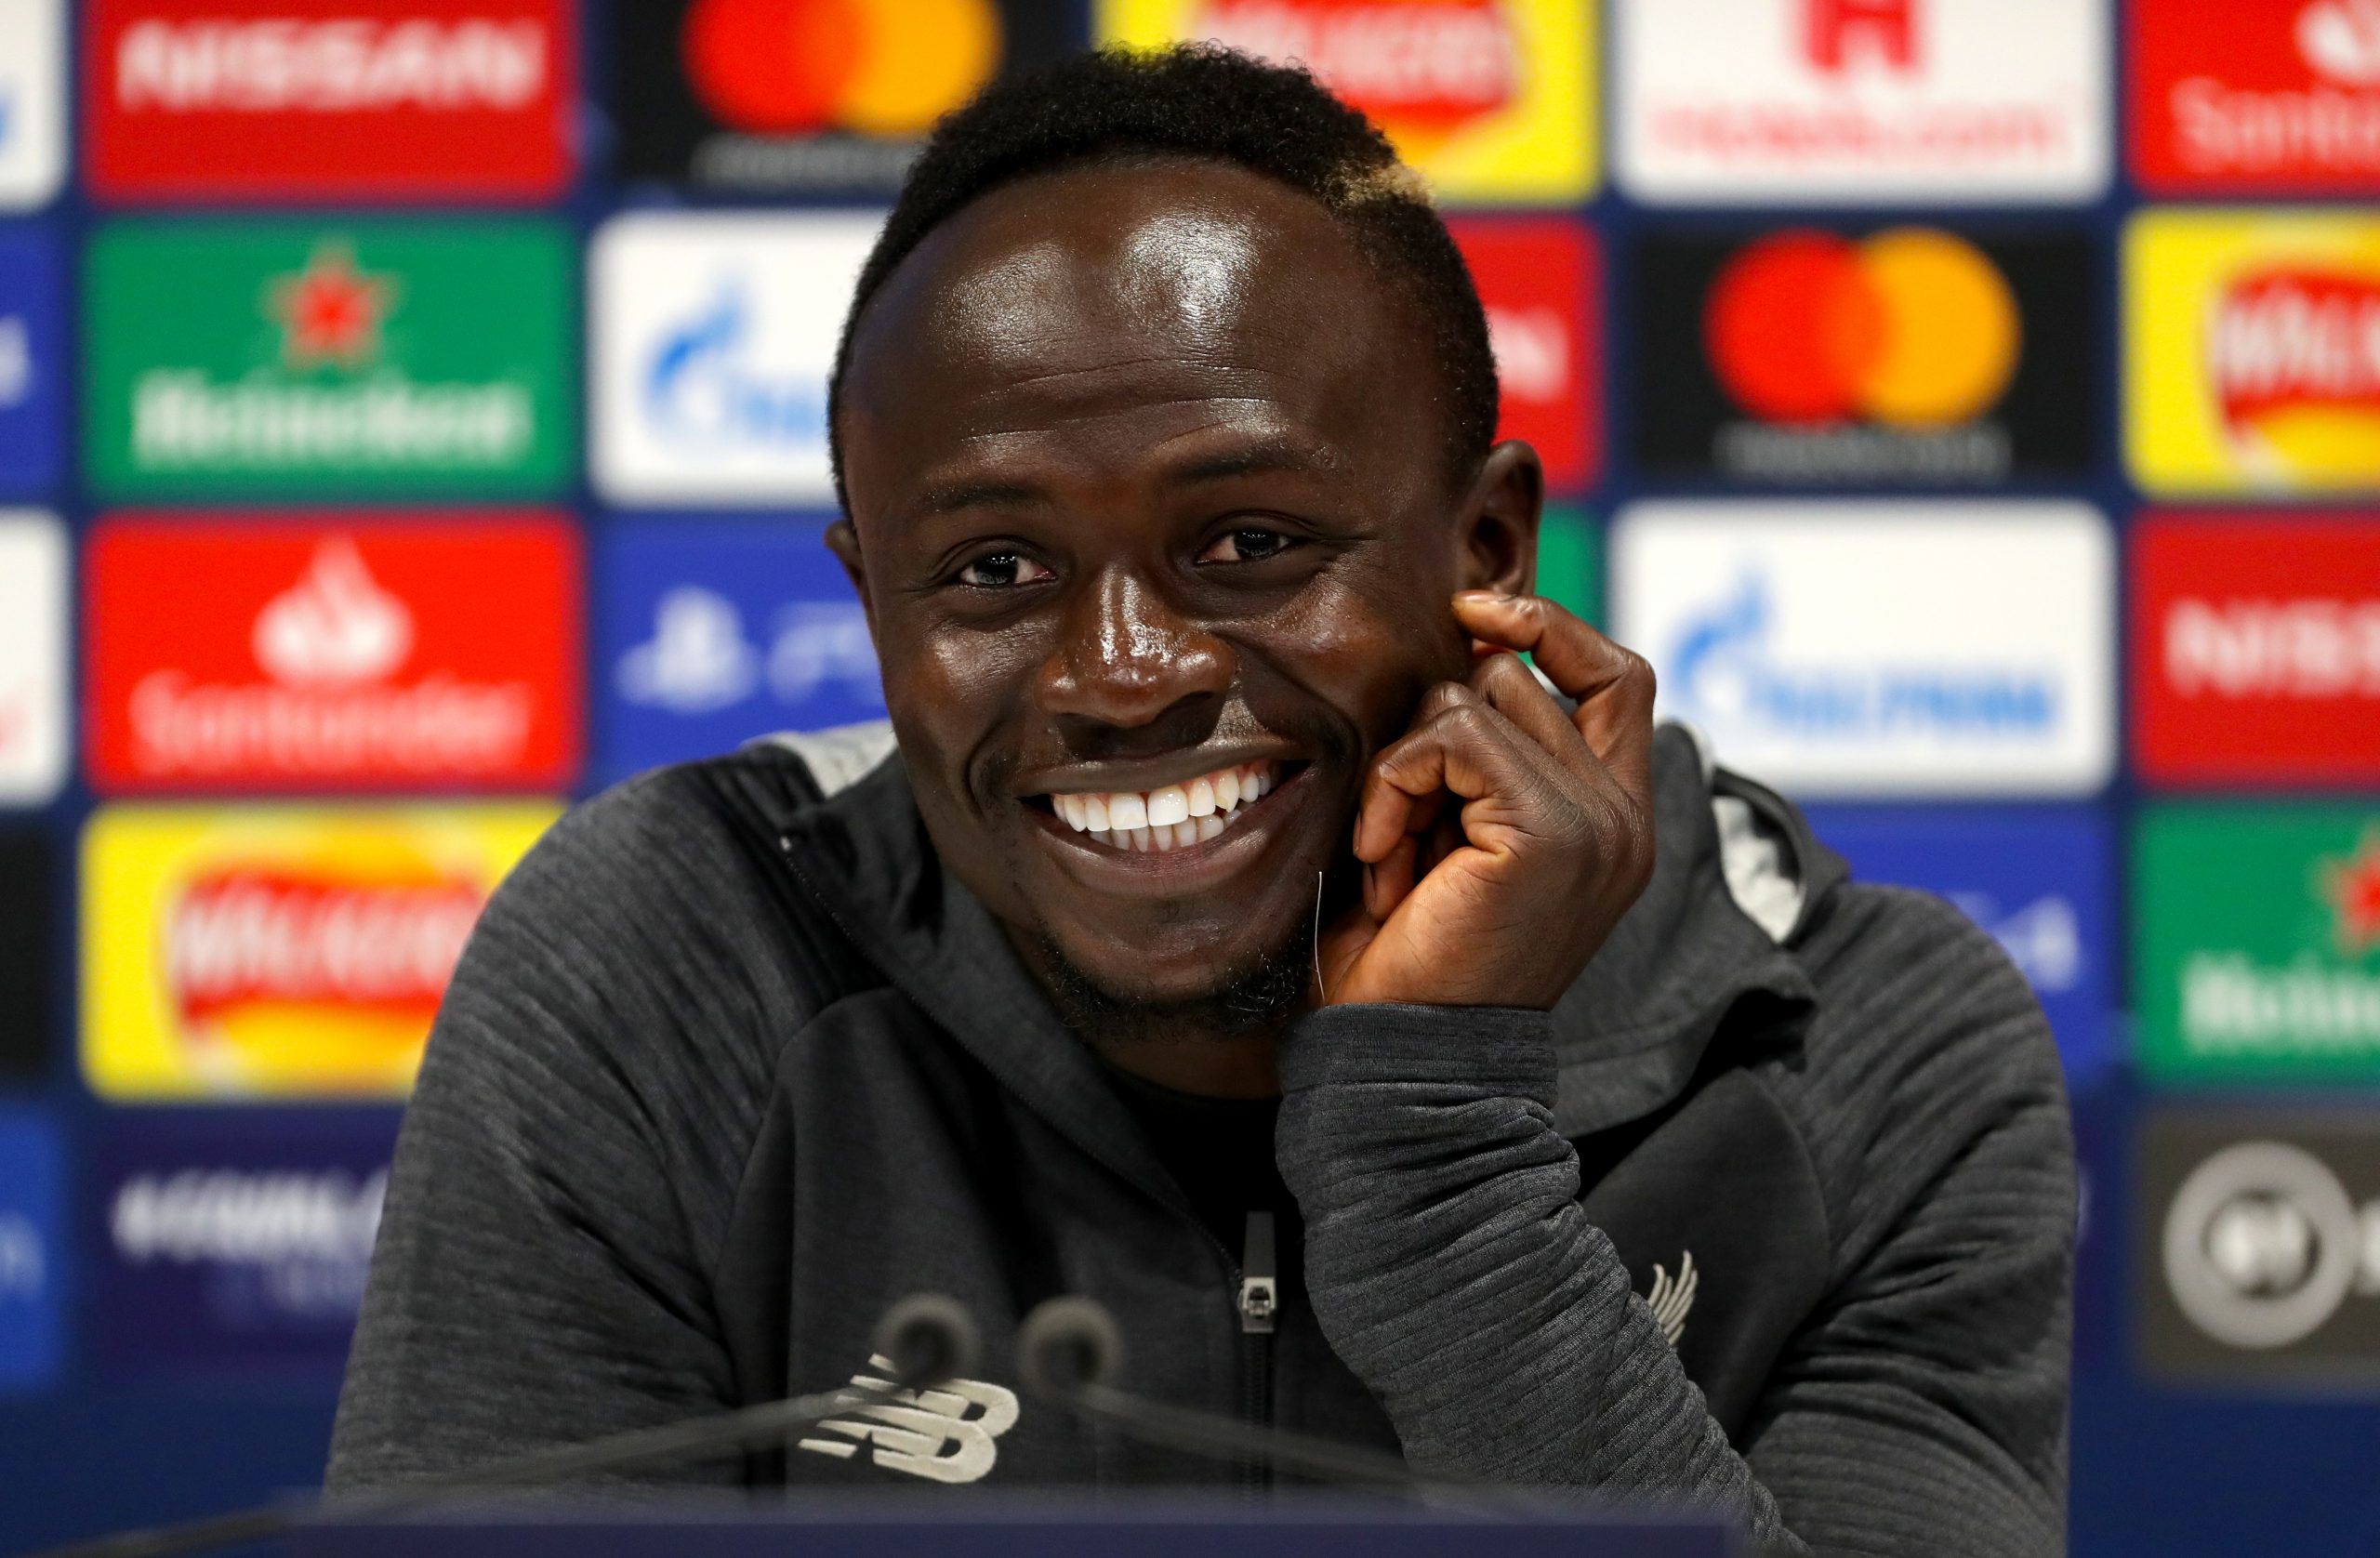 Does Sadio Mané have a shot at winning the Ballon d’Or?